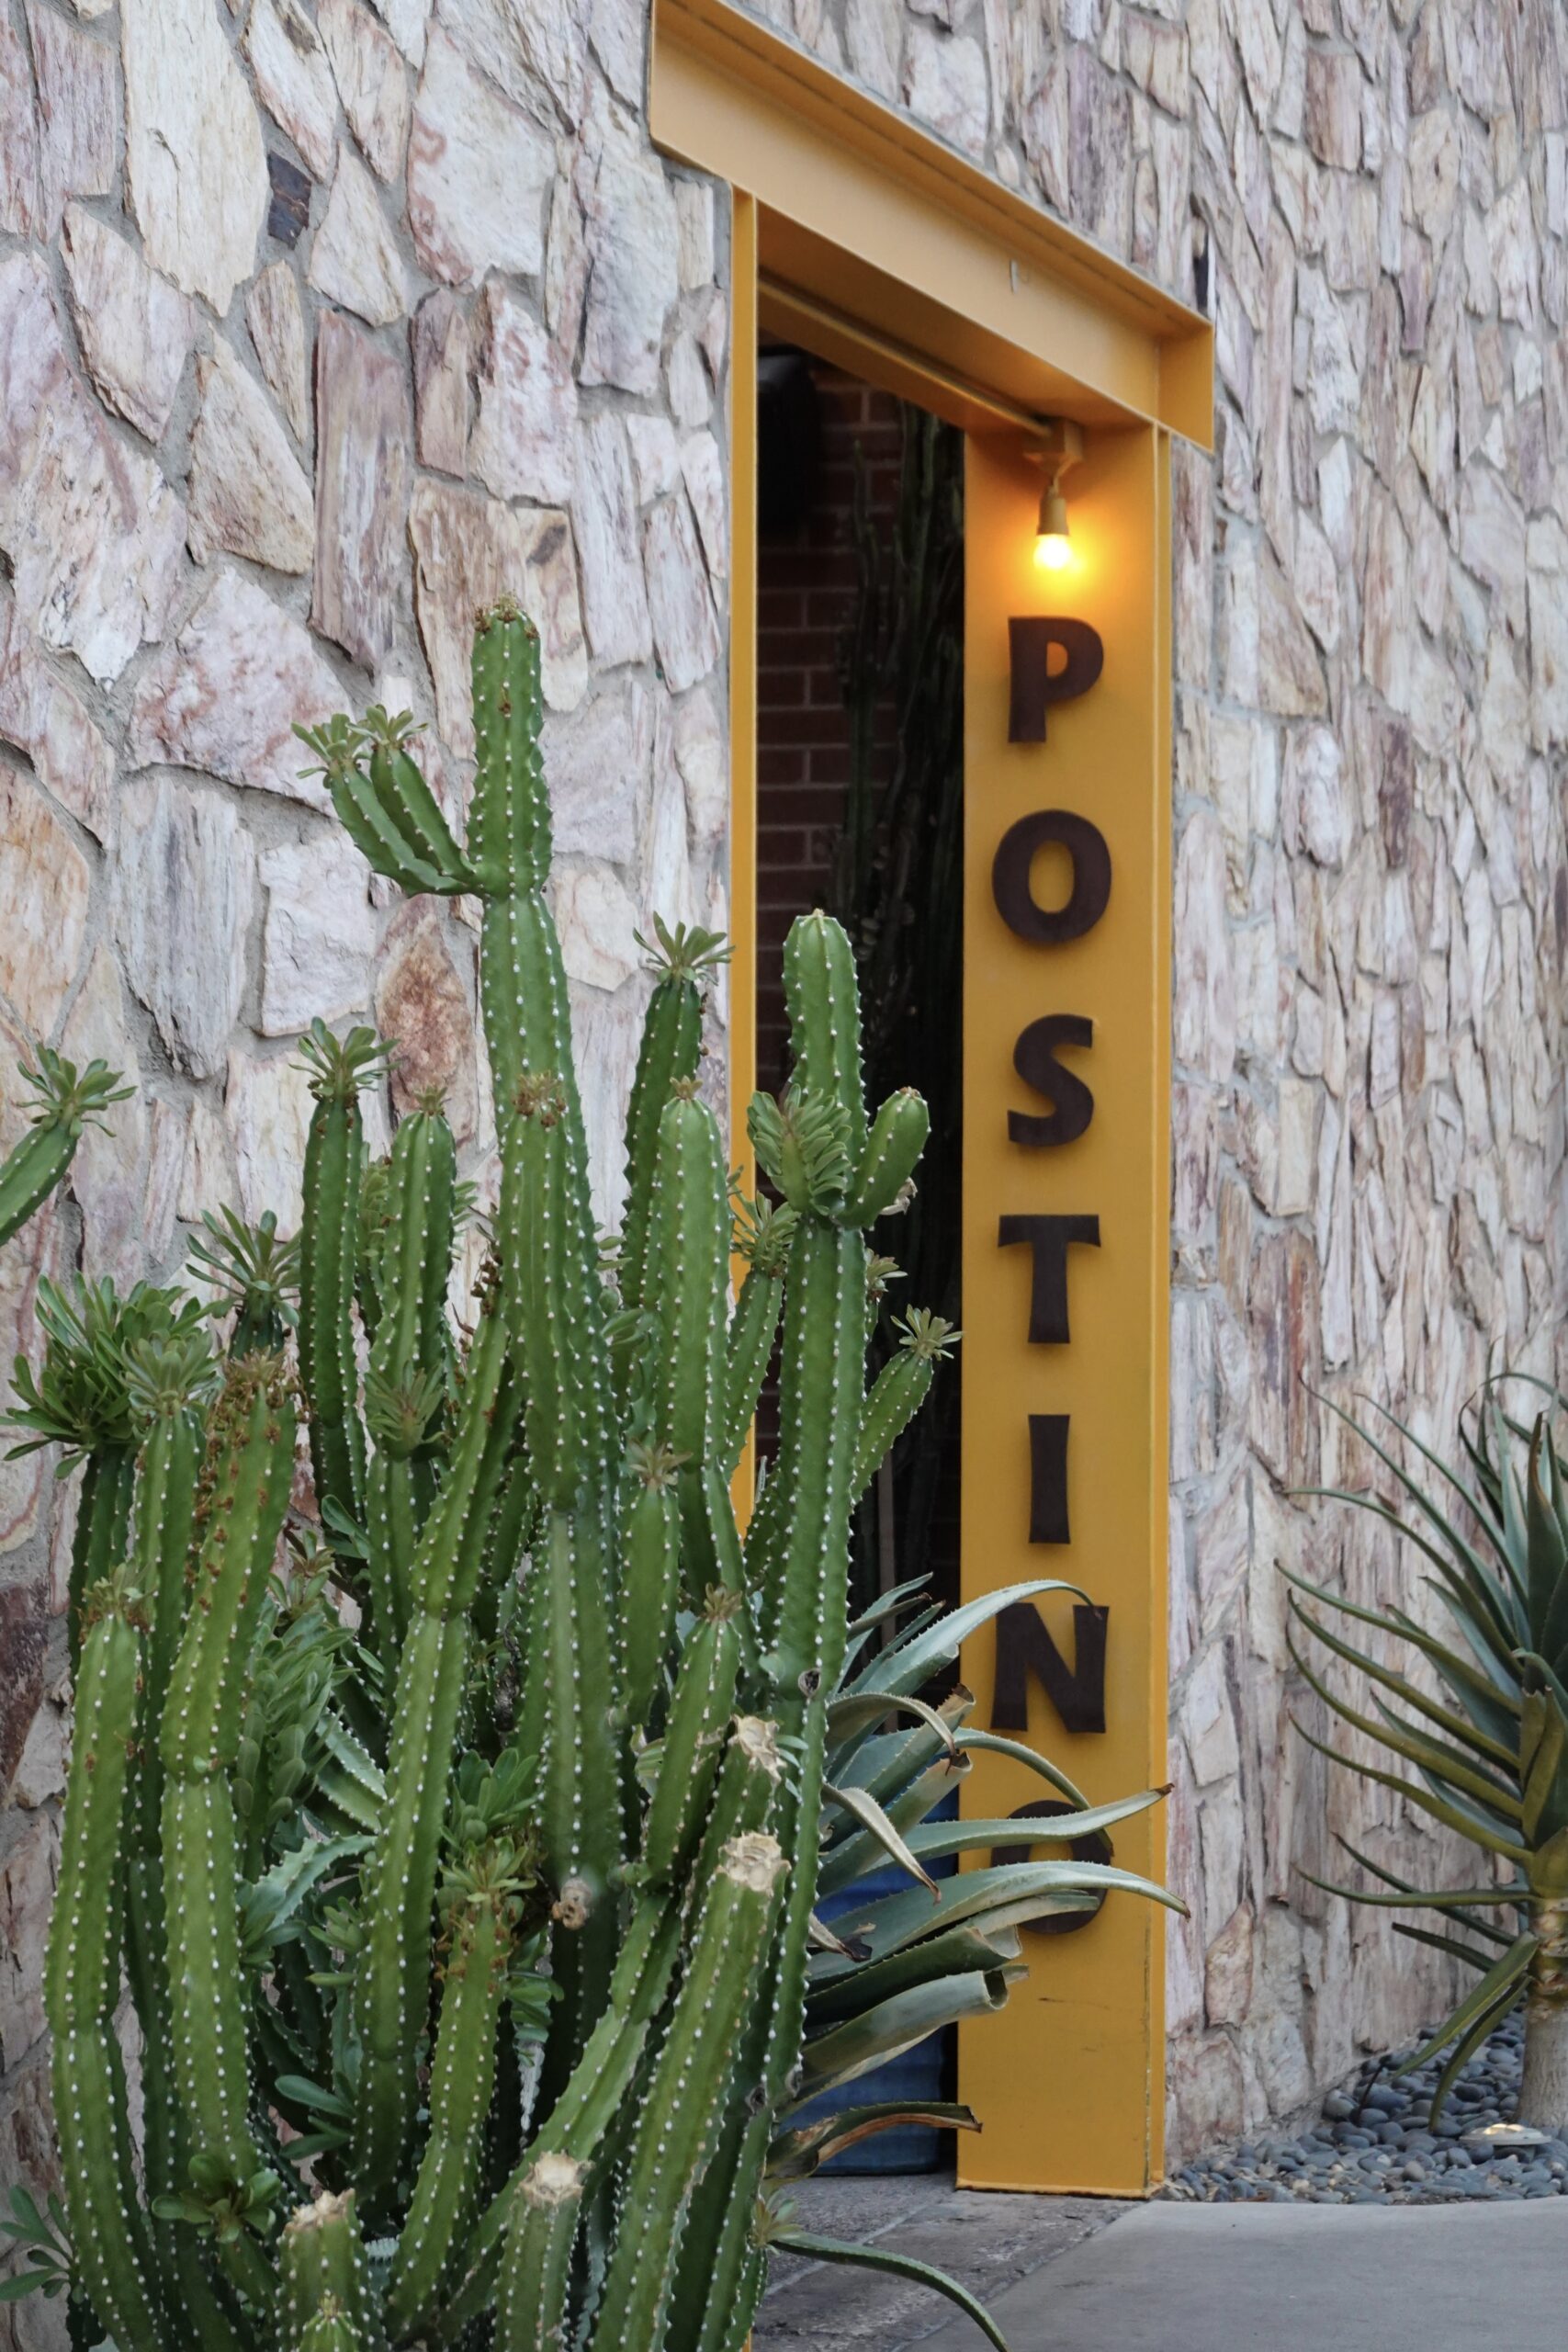 awesome restaurants in phoenix- postinos